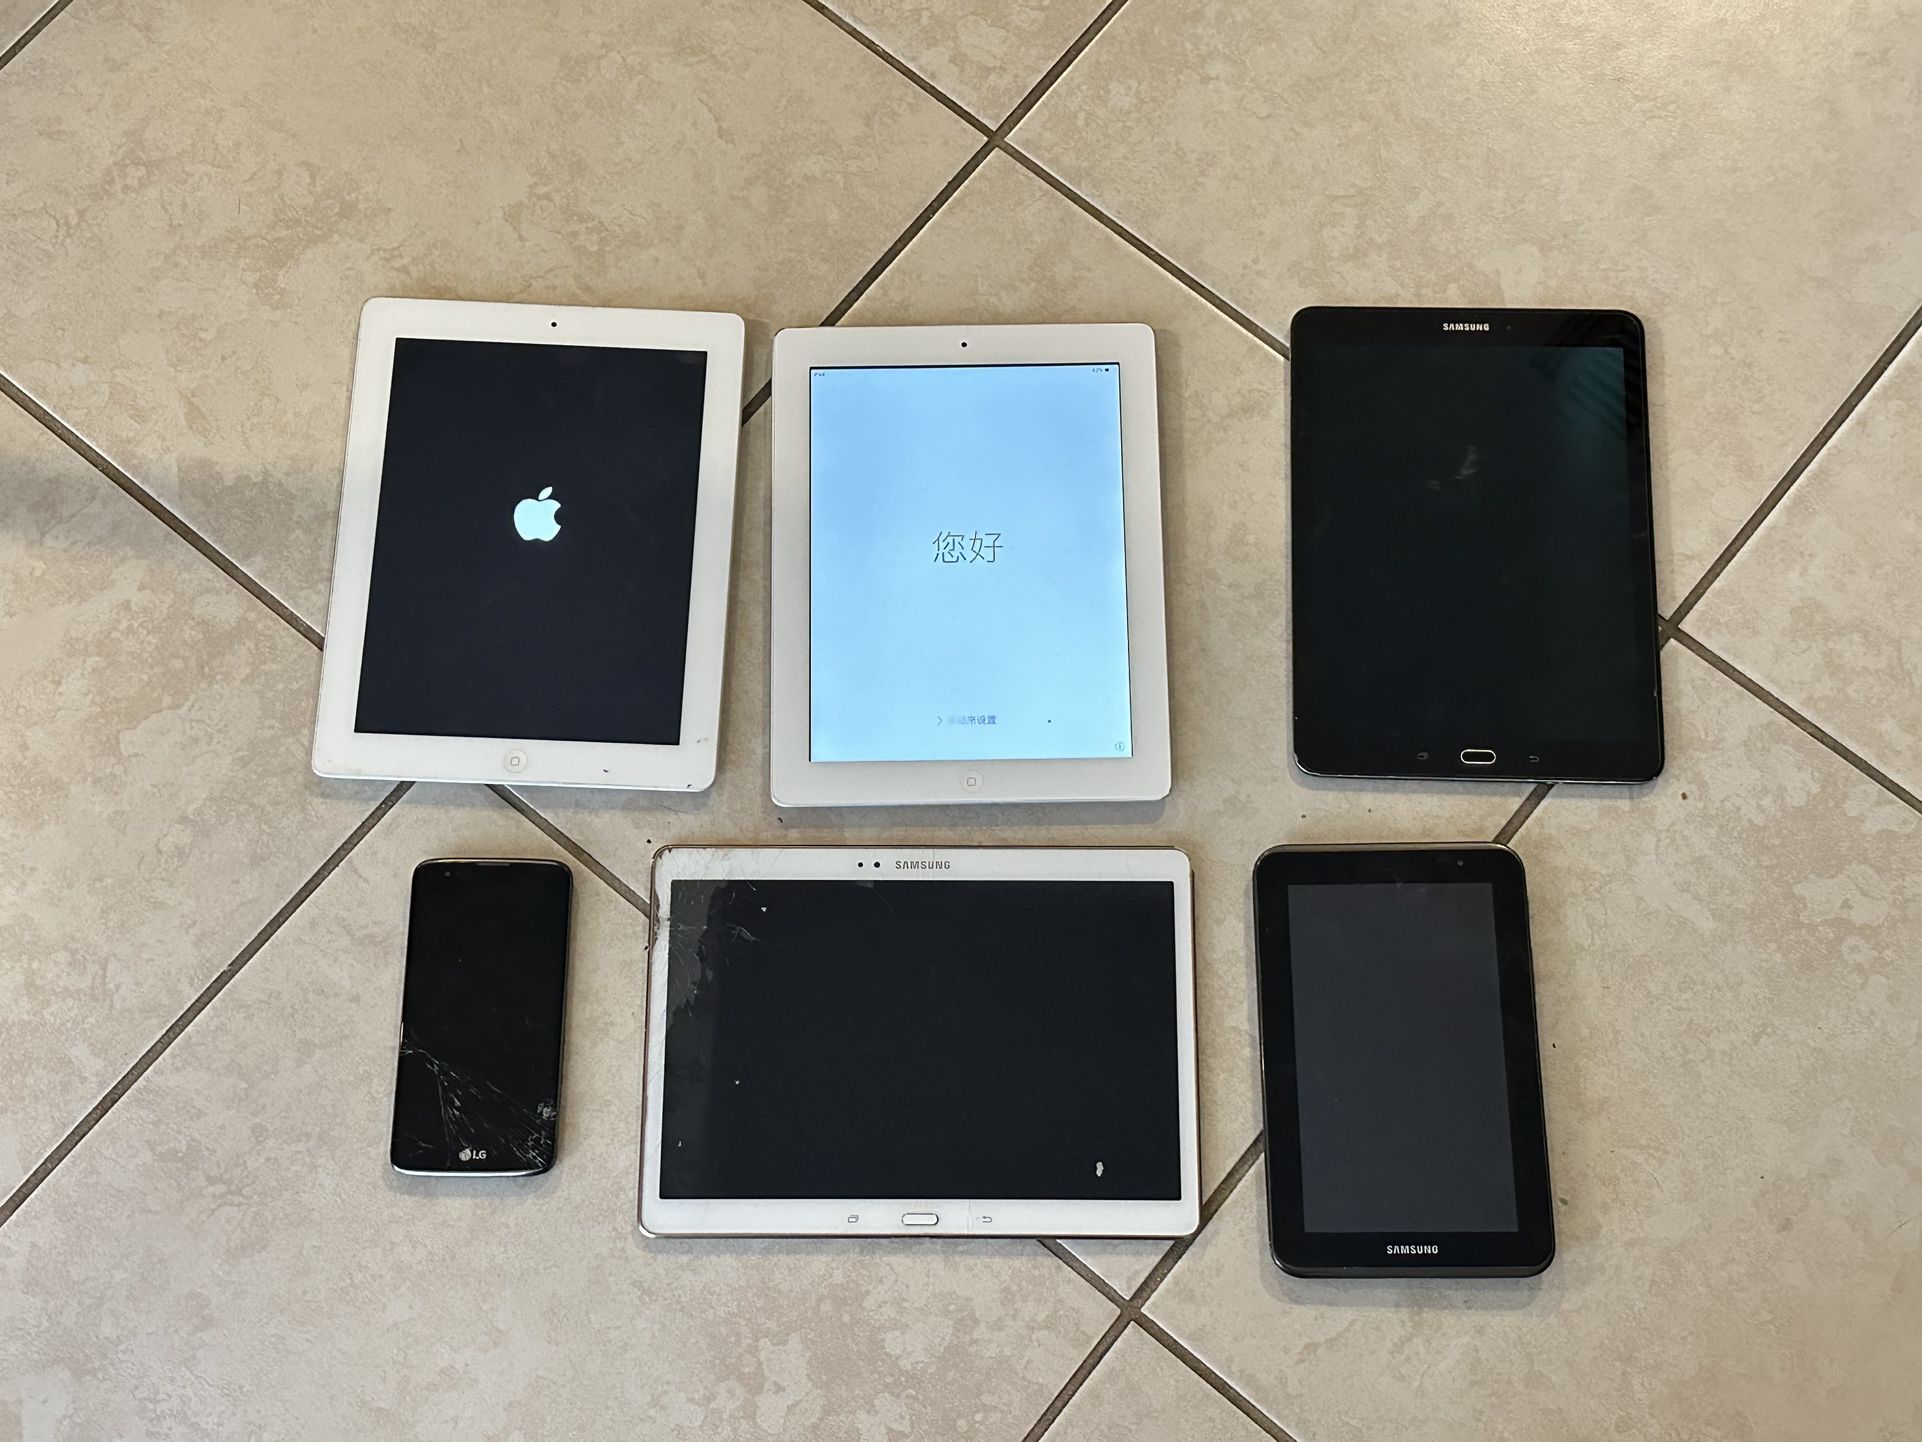 iPad 2, iPad 3, Galaxy Tab S, Galaxy Tab S2, Galaxy Tab Tablet With for Sale in Kissimmee, FL - OfferUp